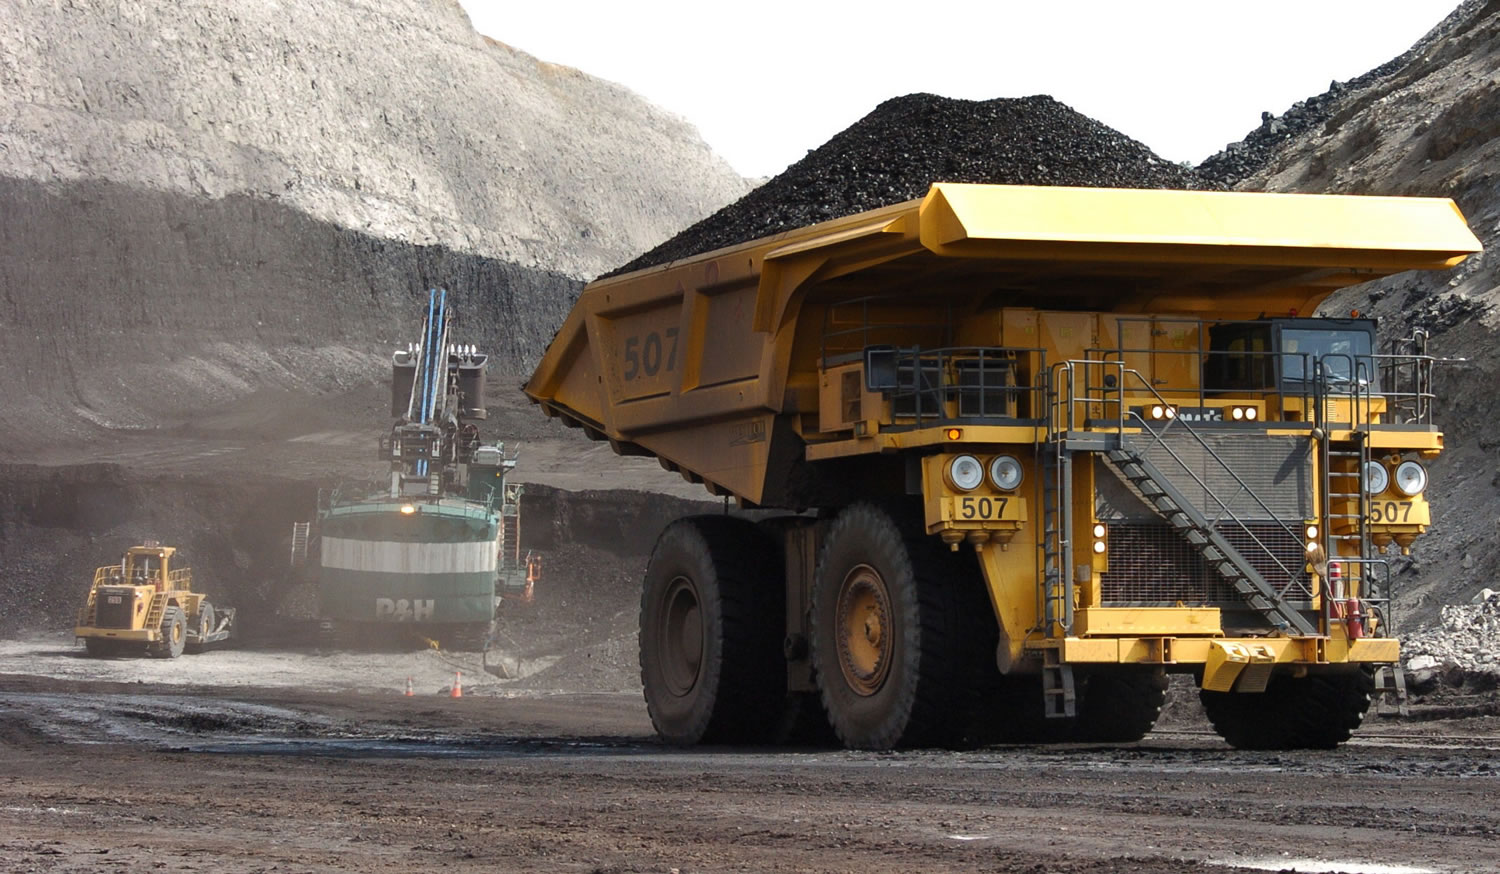 A truck carrying 250 tons of coal hauls it to the surface of the Spring Creek mine near Decker, Mont.